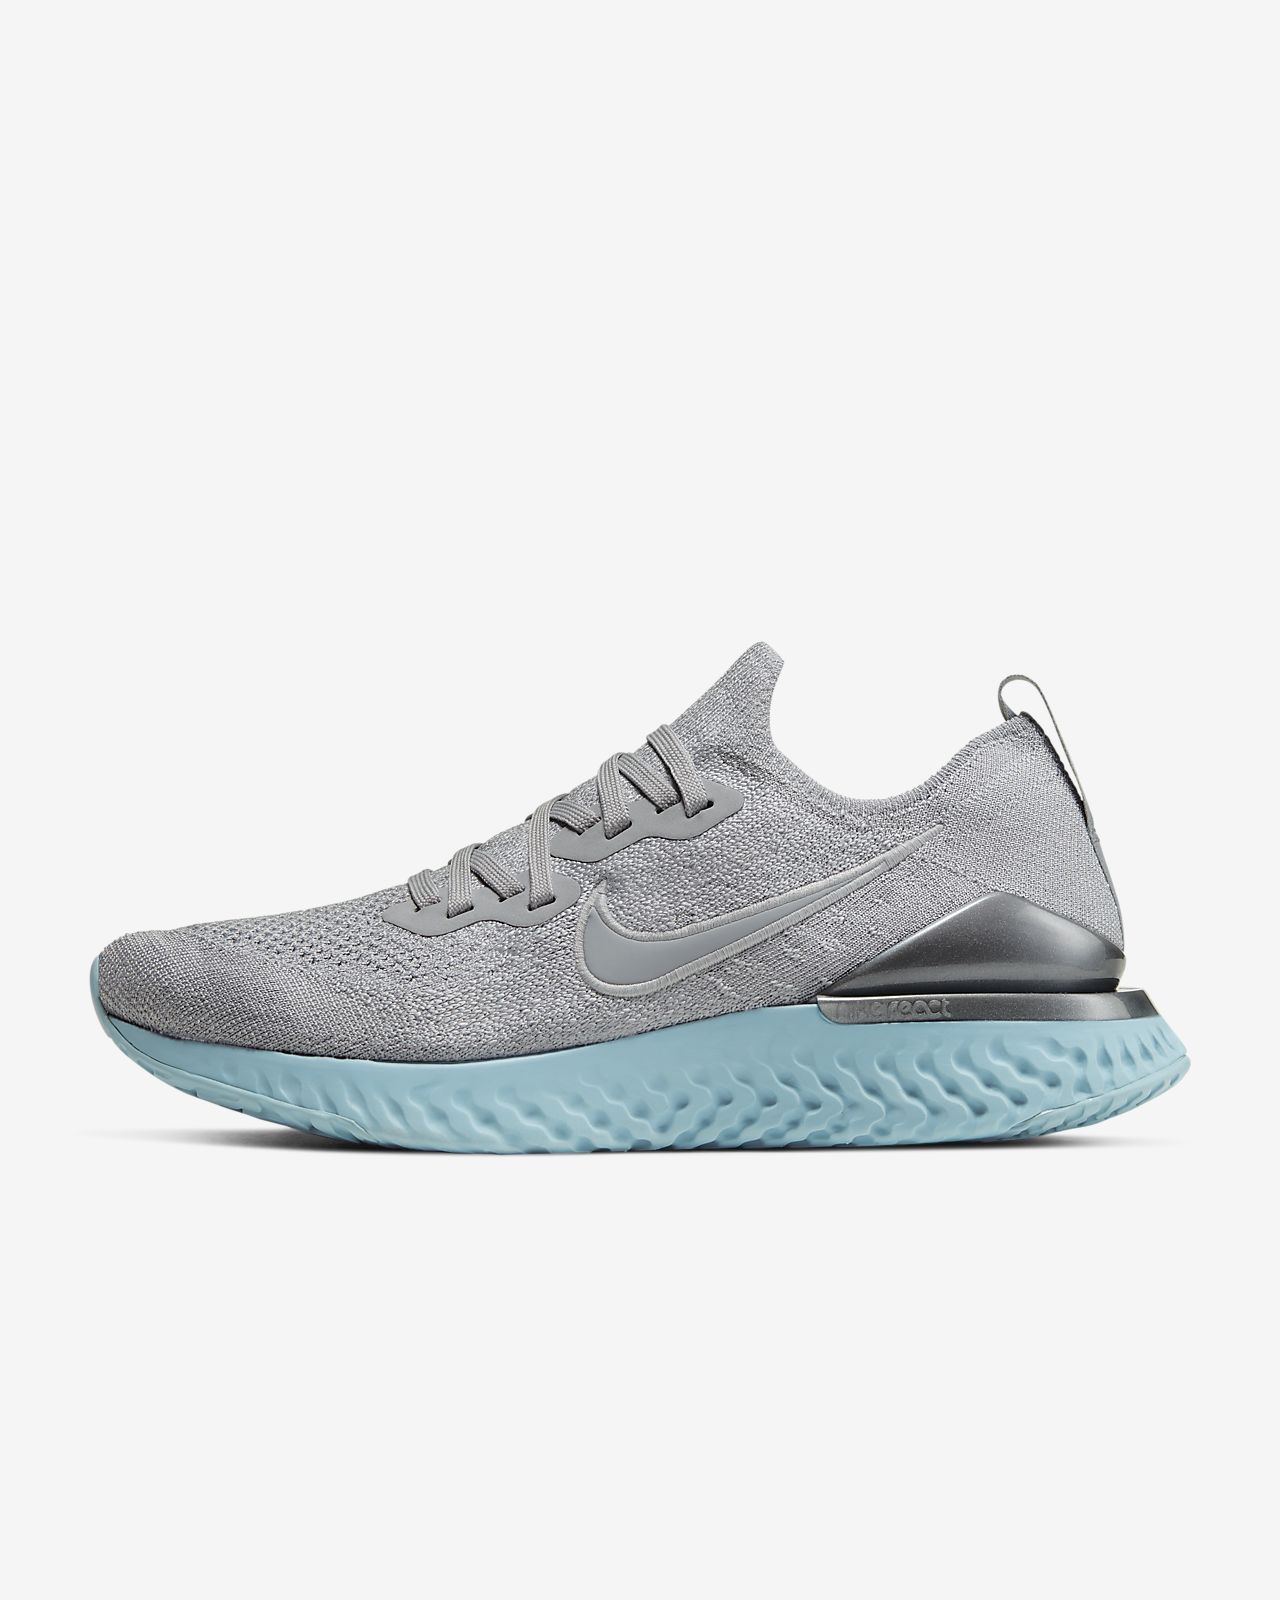 epic react flyknit running shoes gray 